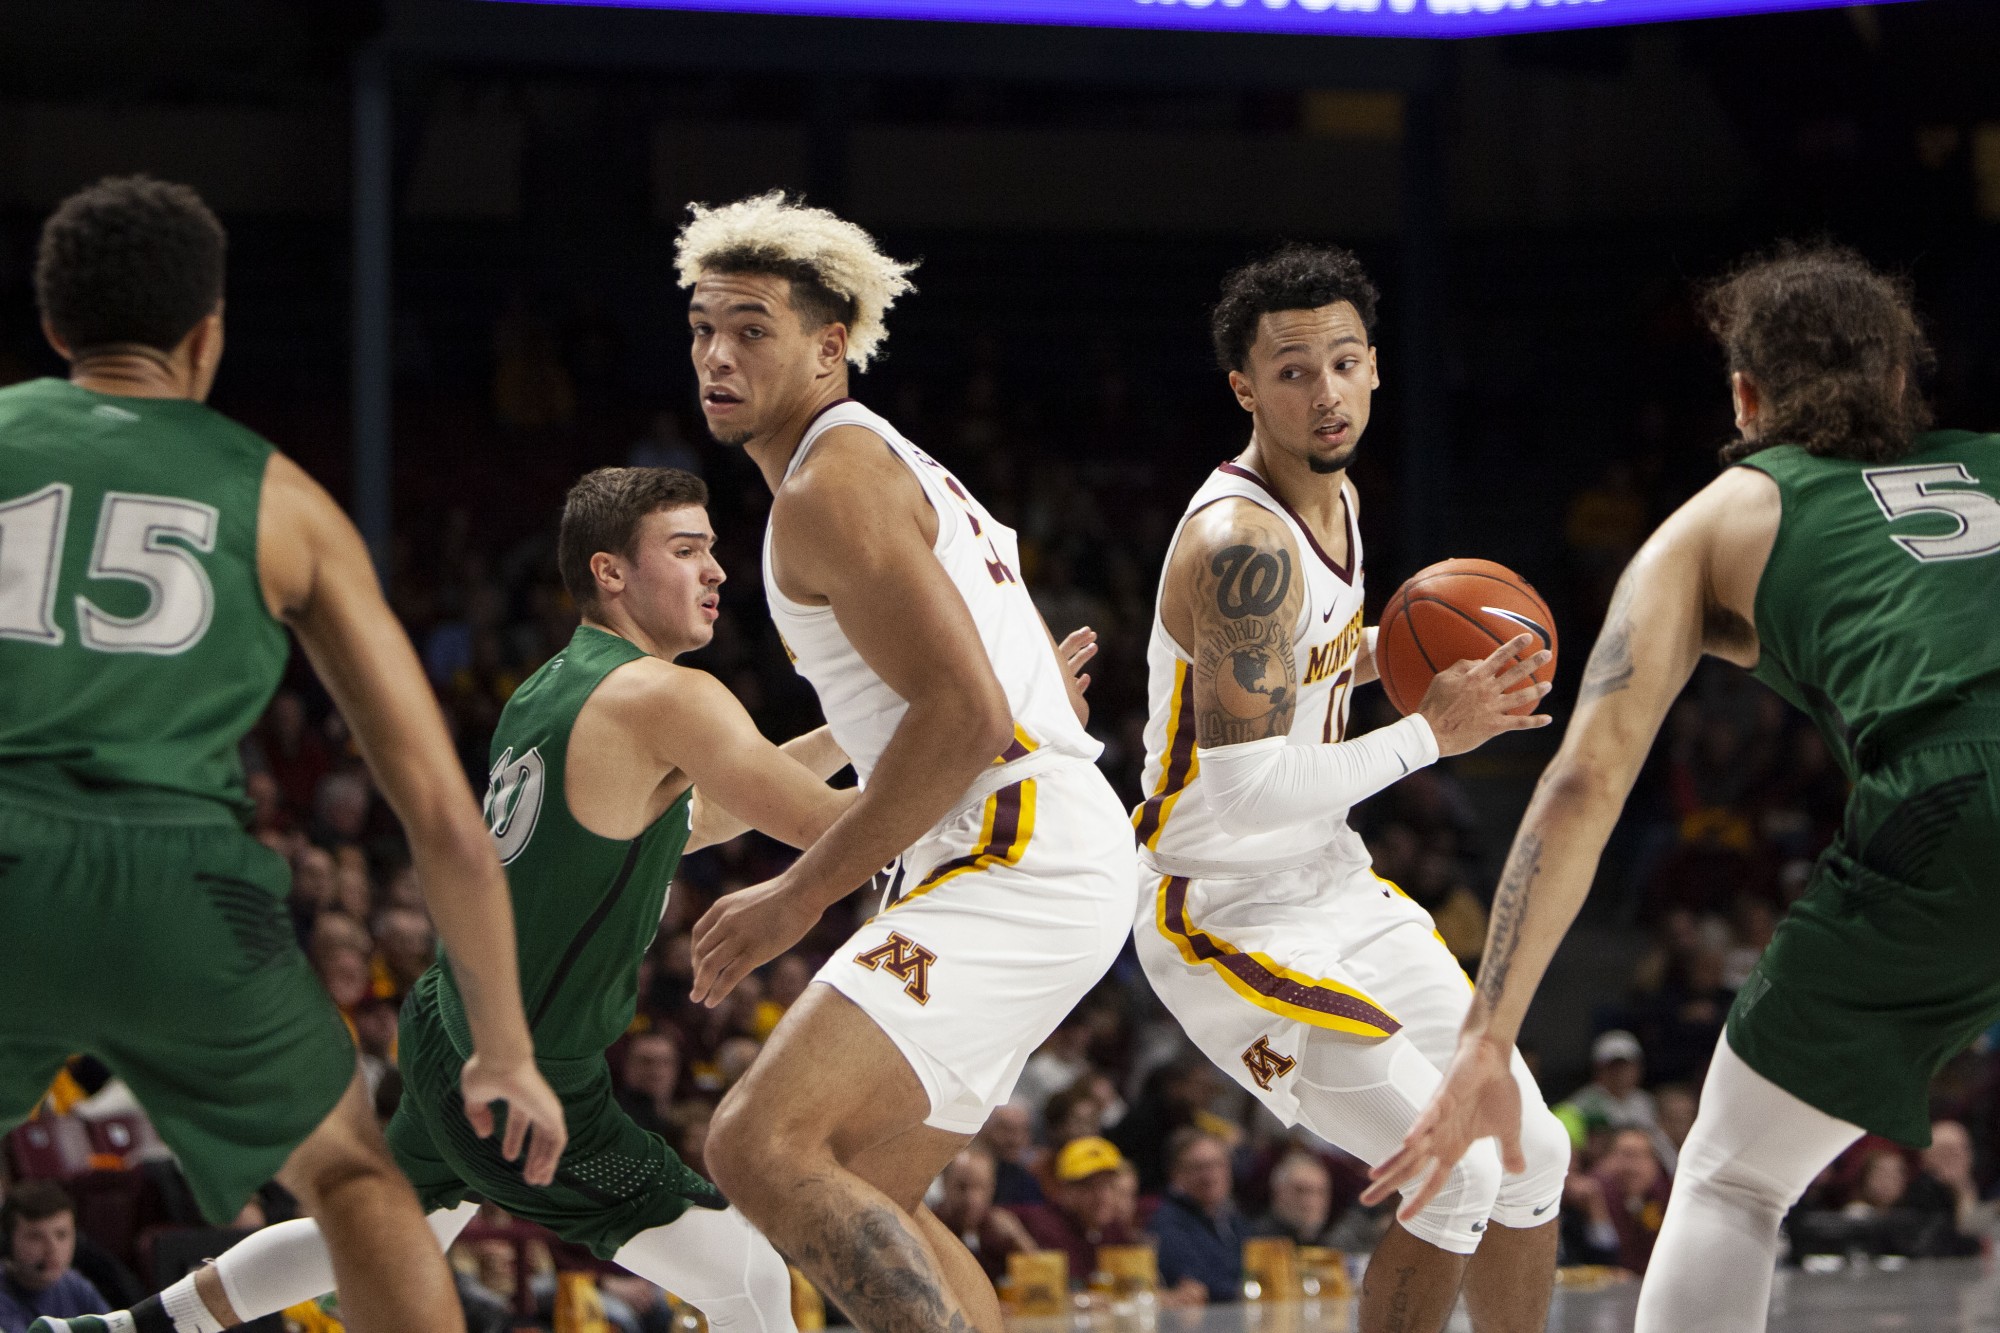 Gophers, from left, Forward Jarvis Omersa and Guard Payton Willis confront defenders at Williams Arena on Tuesday, Nov. 5. The Gophers went on to defeat Cleveland State 85-50. 